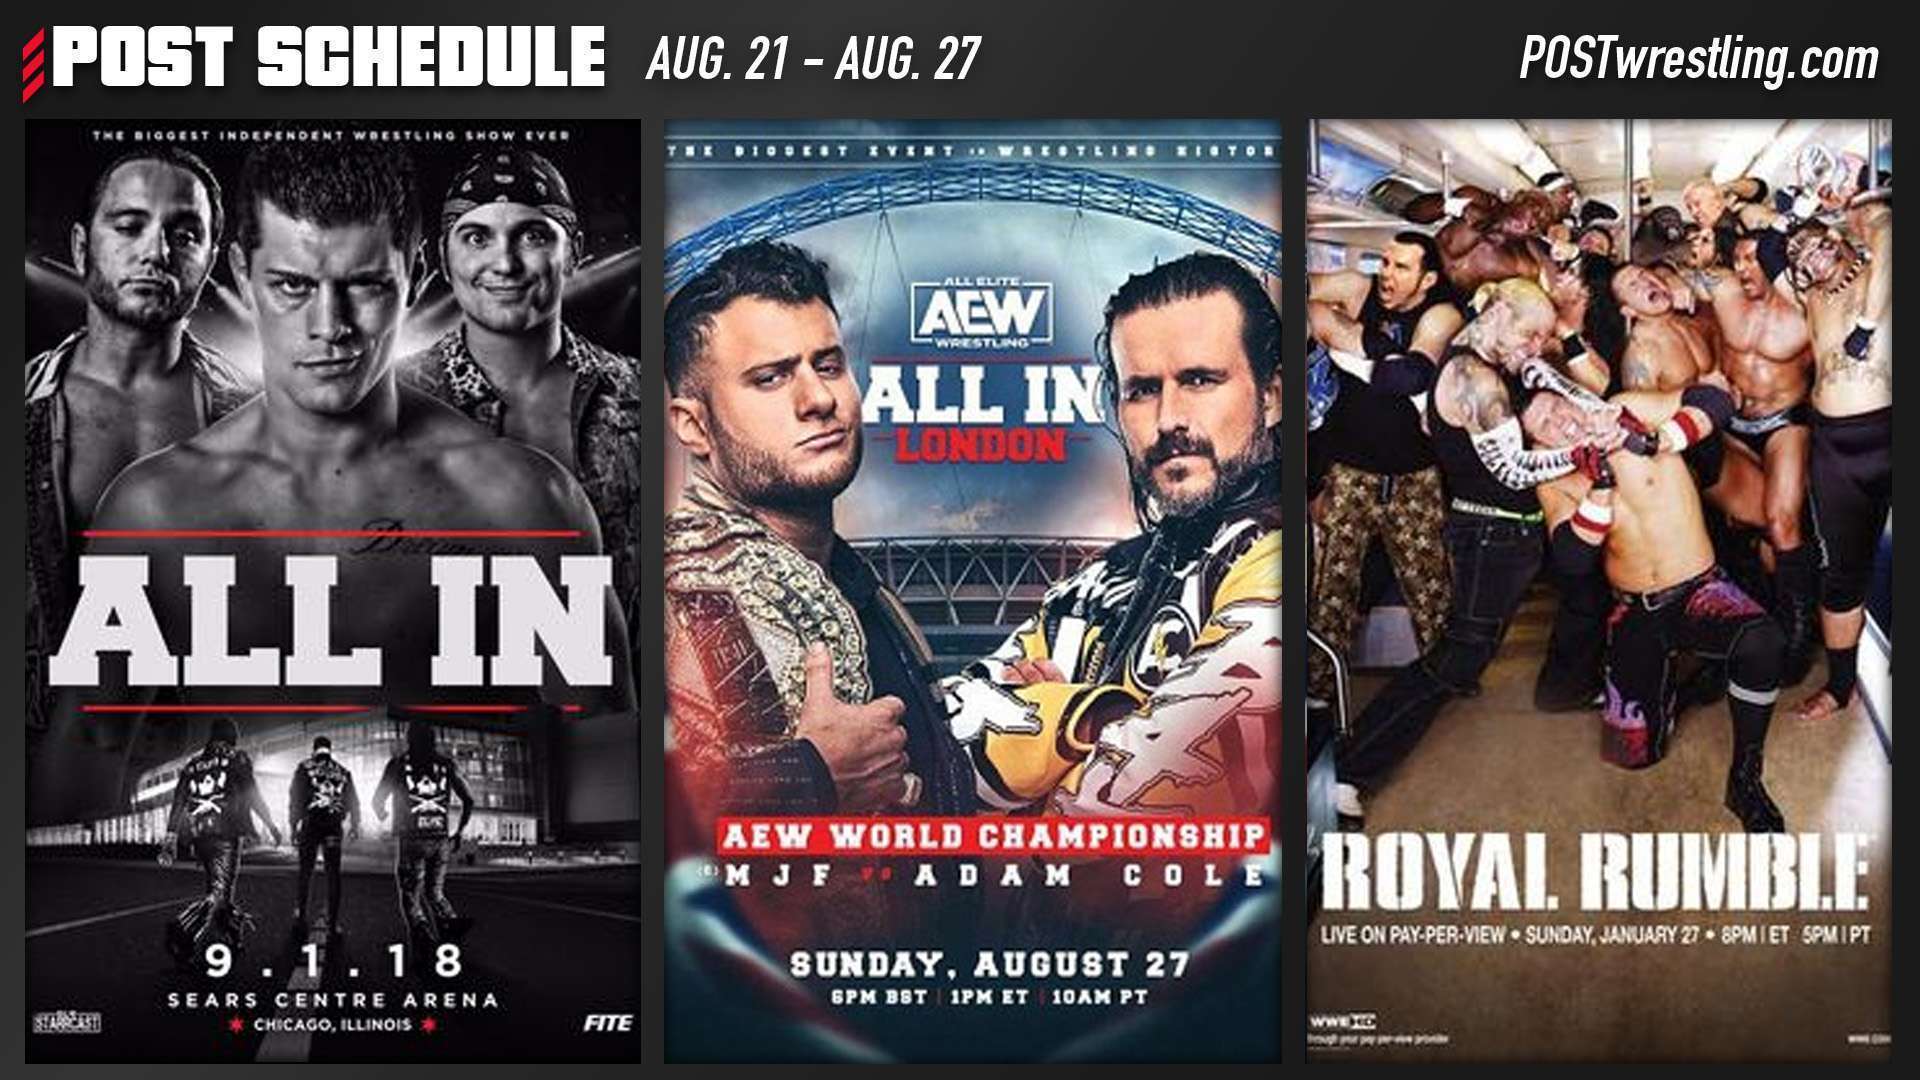 POST SCHEDULE: All In, Royal Rumble 2008, All In '18 review